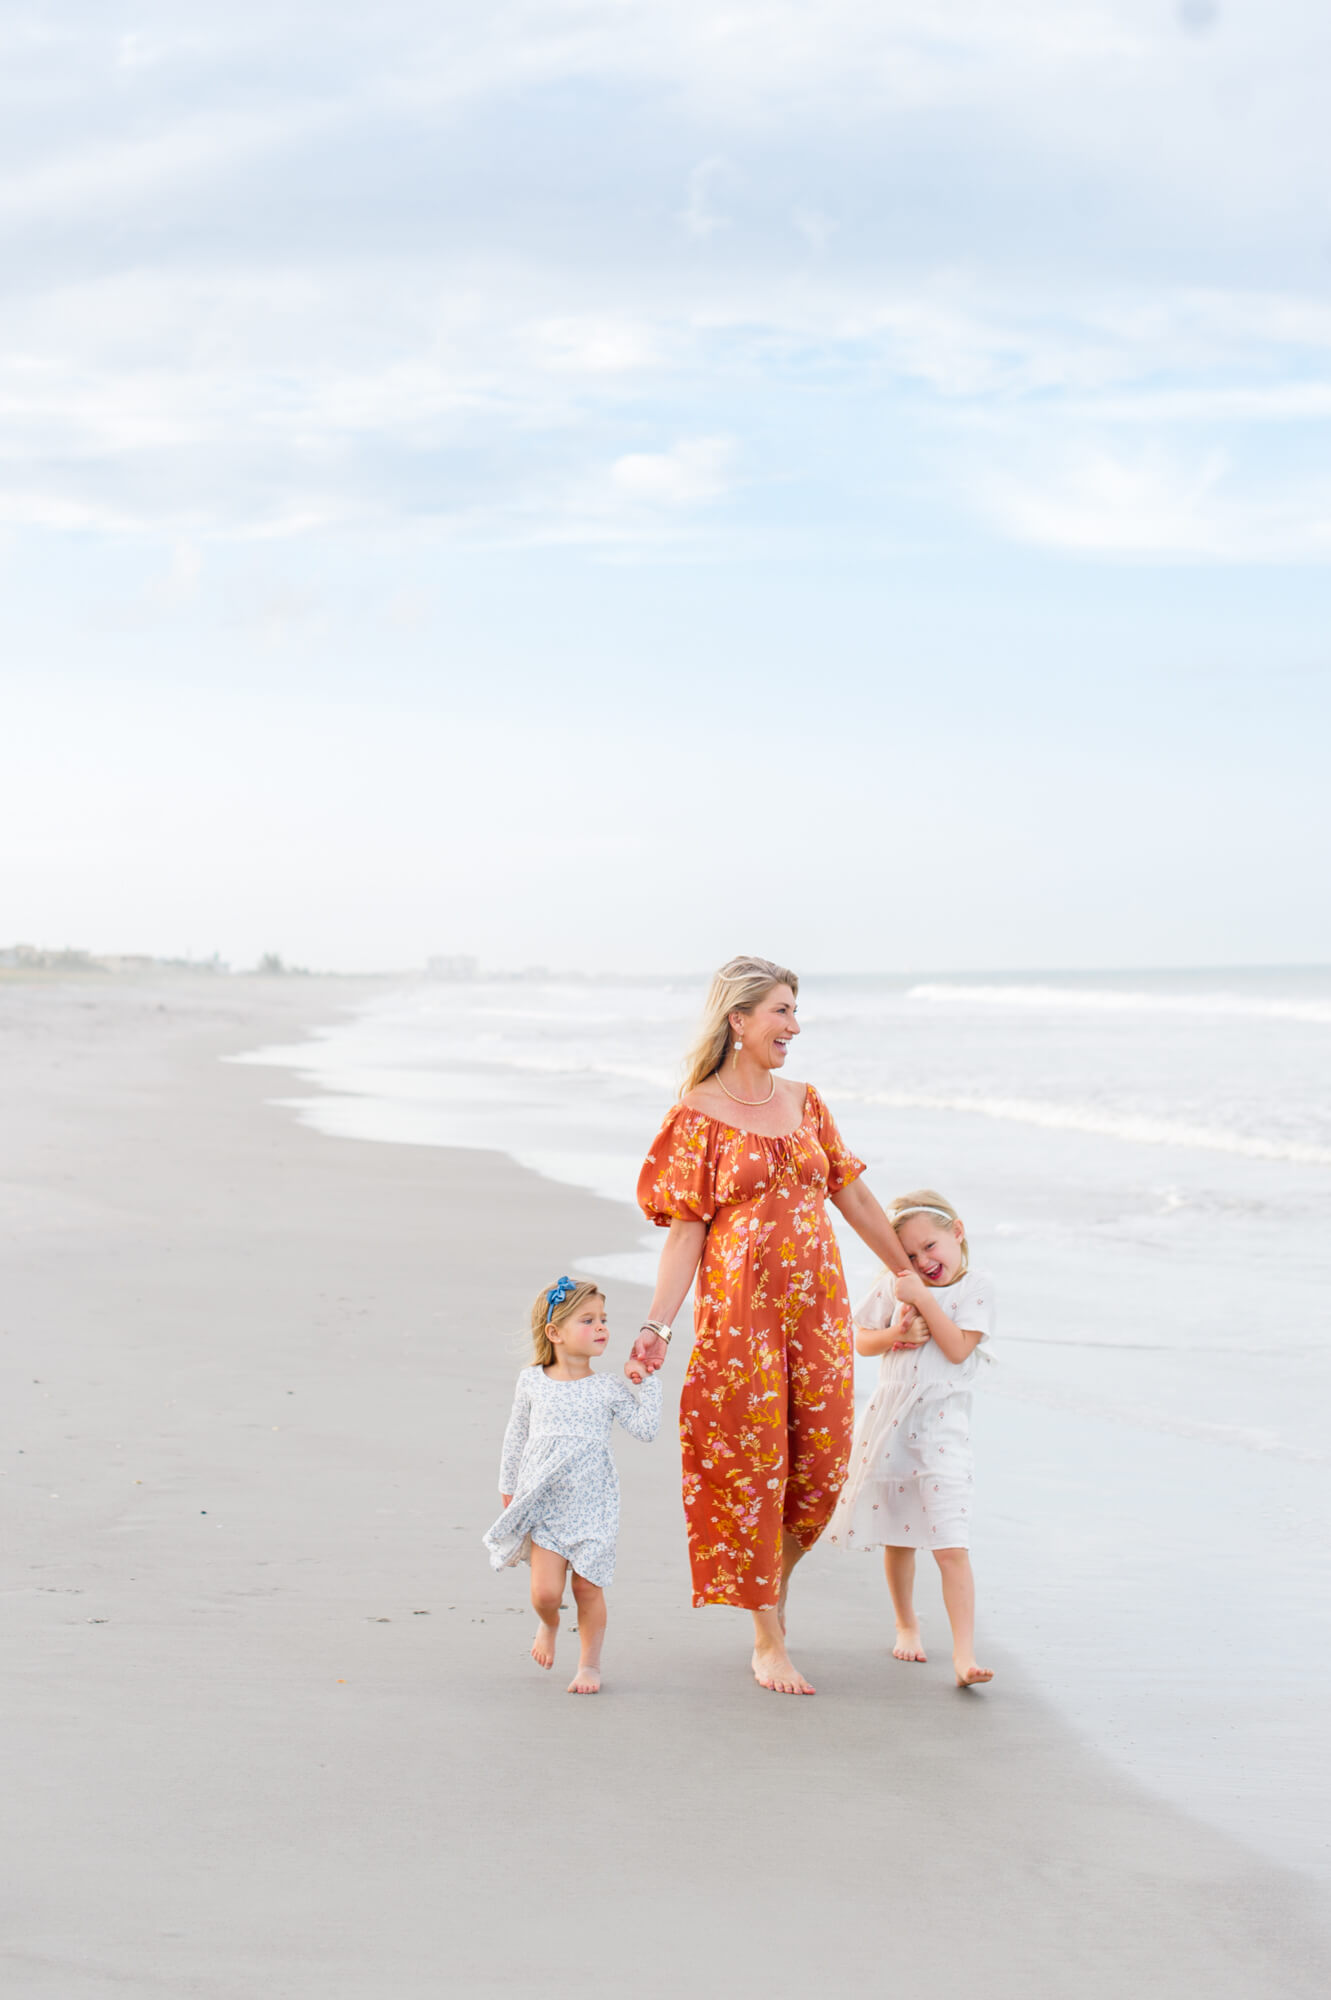 Beautiful image of grandma walking on the beach with her young granddaughters at sunset